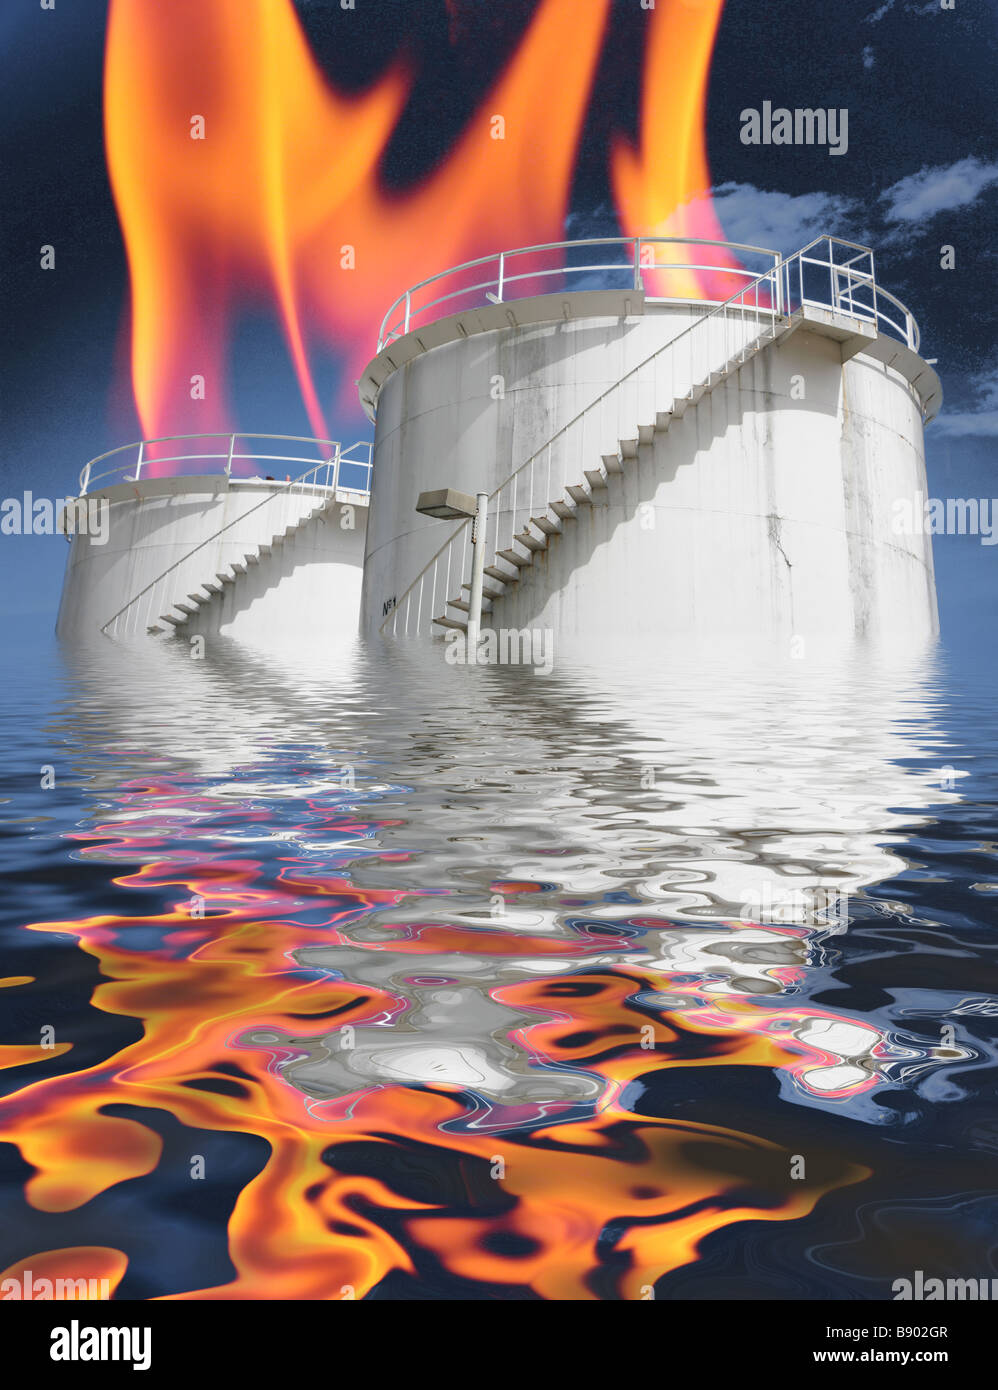 Climate change, oil storage burning & water flood. Manipulated picture Stock Photo